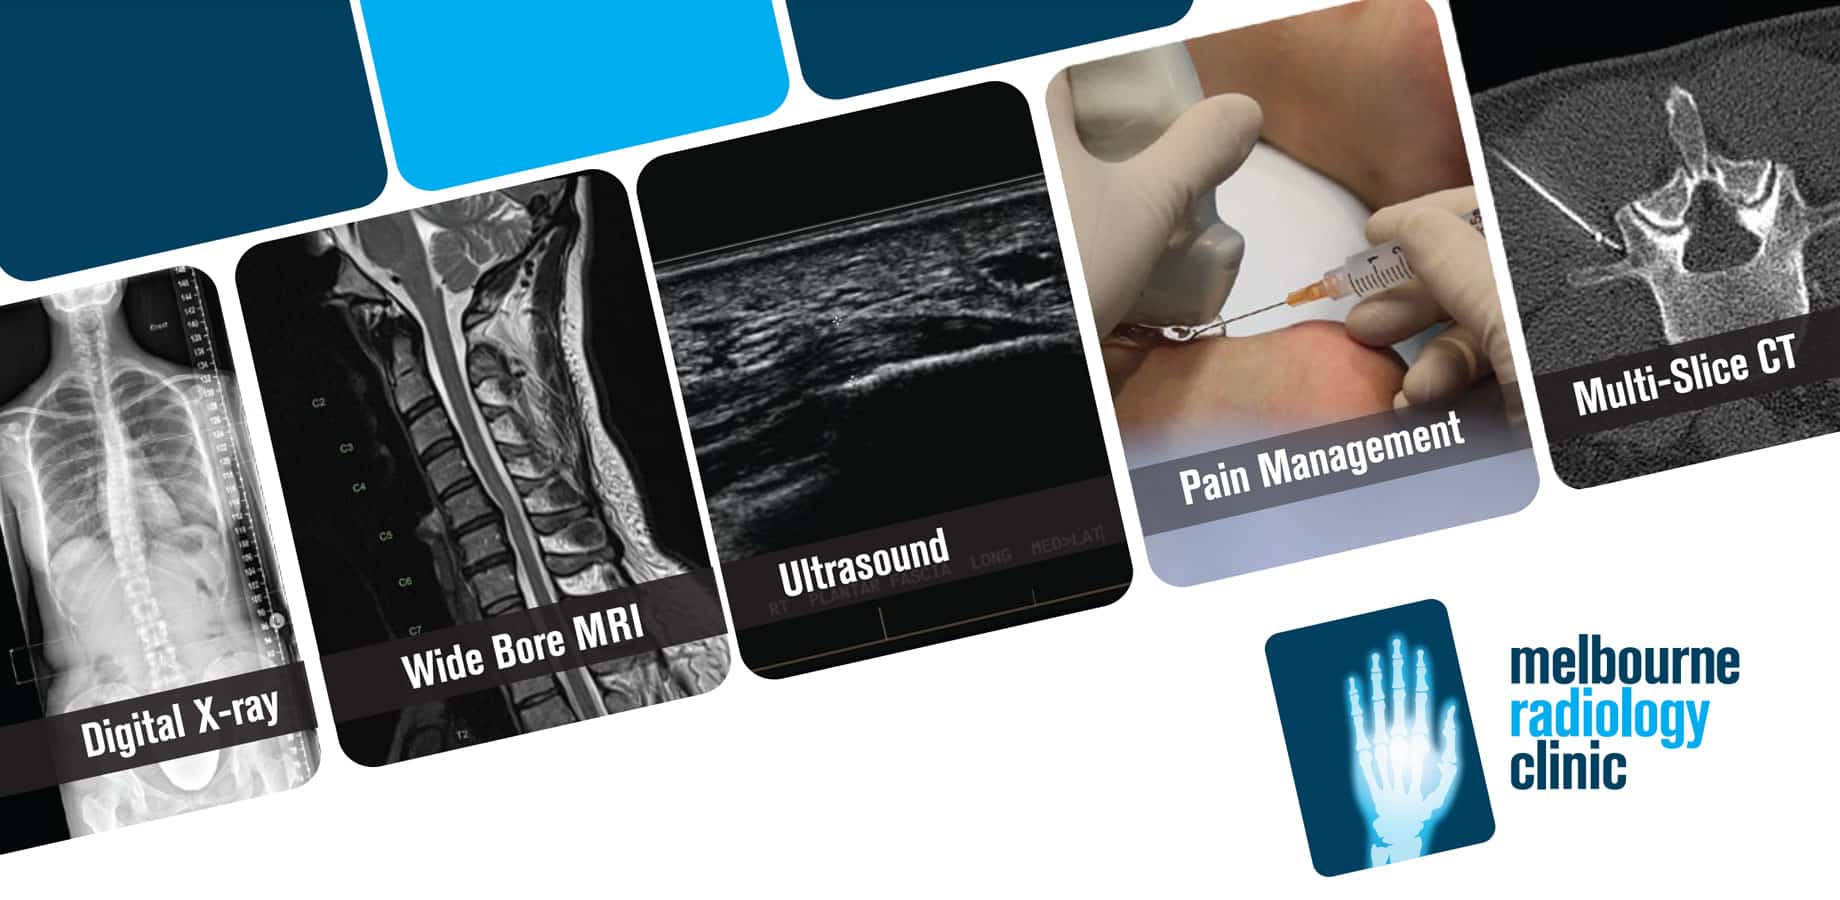 images of digital x-ray, MRI, ultrasound, pain management, and multi-slice CT